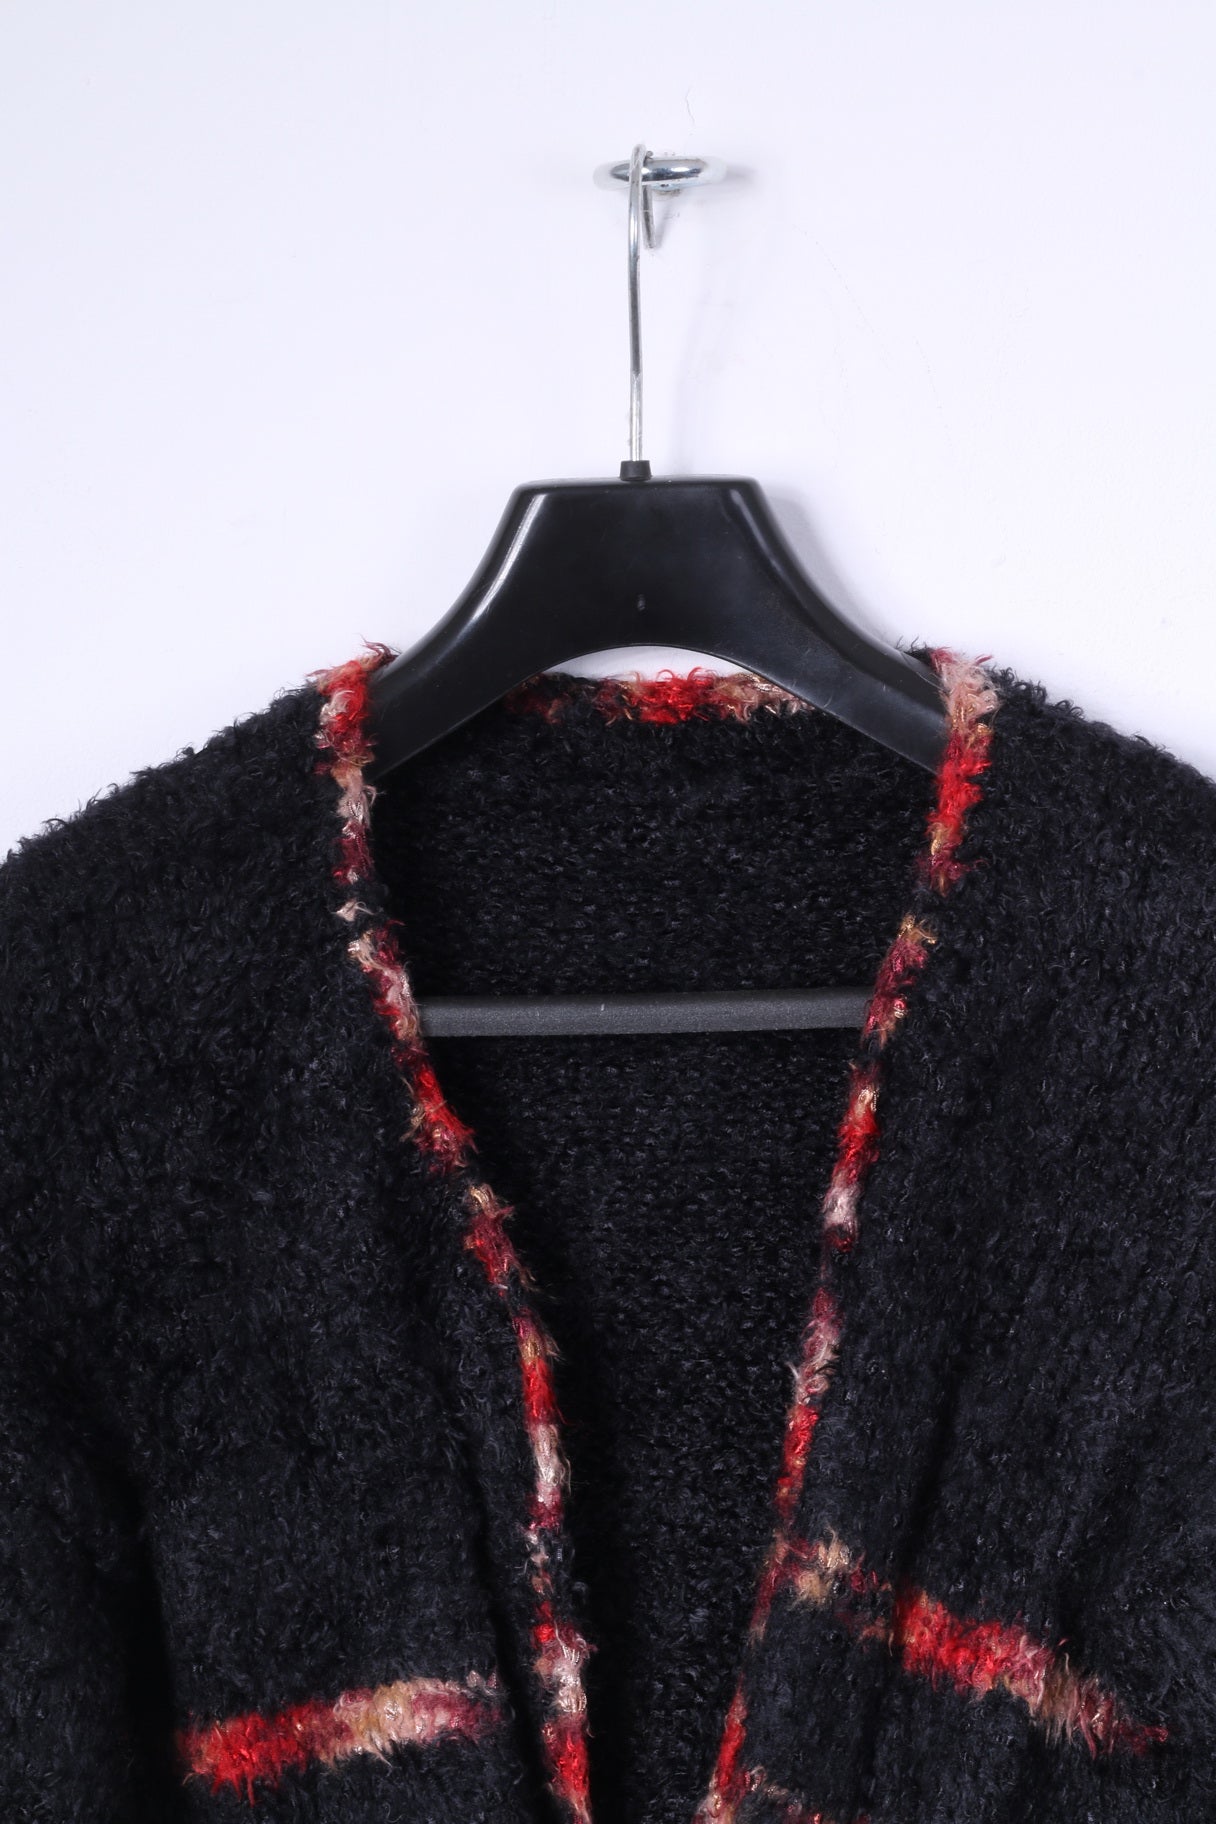 Vintage Womens S/M Cardigan Black Open Front Mohair Heavy Warm Sweater